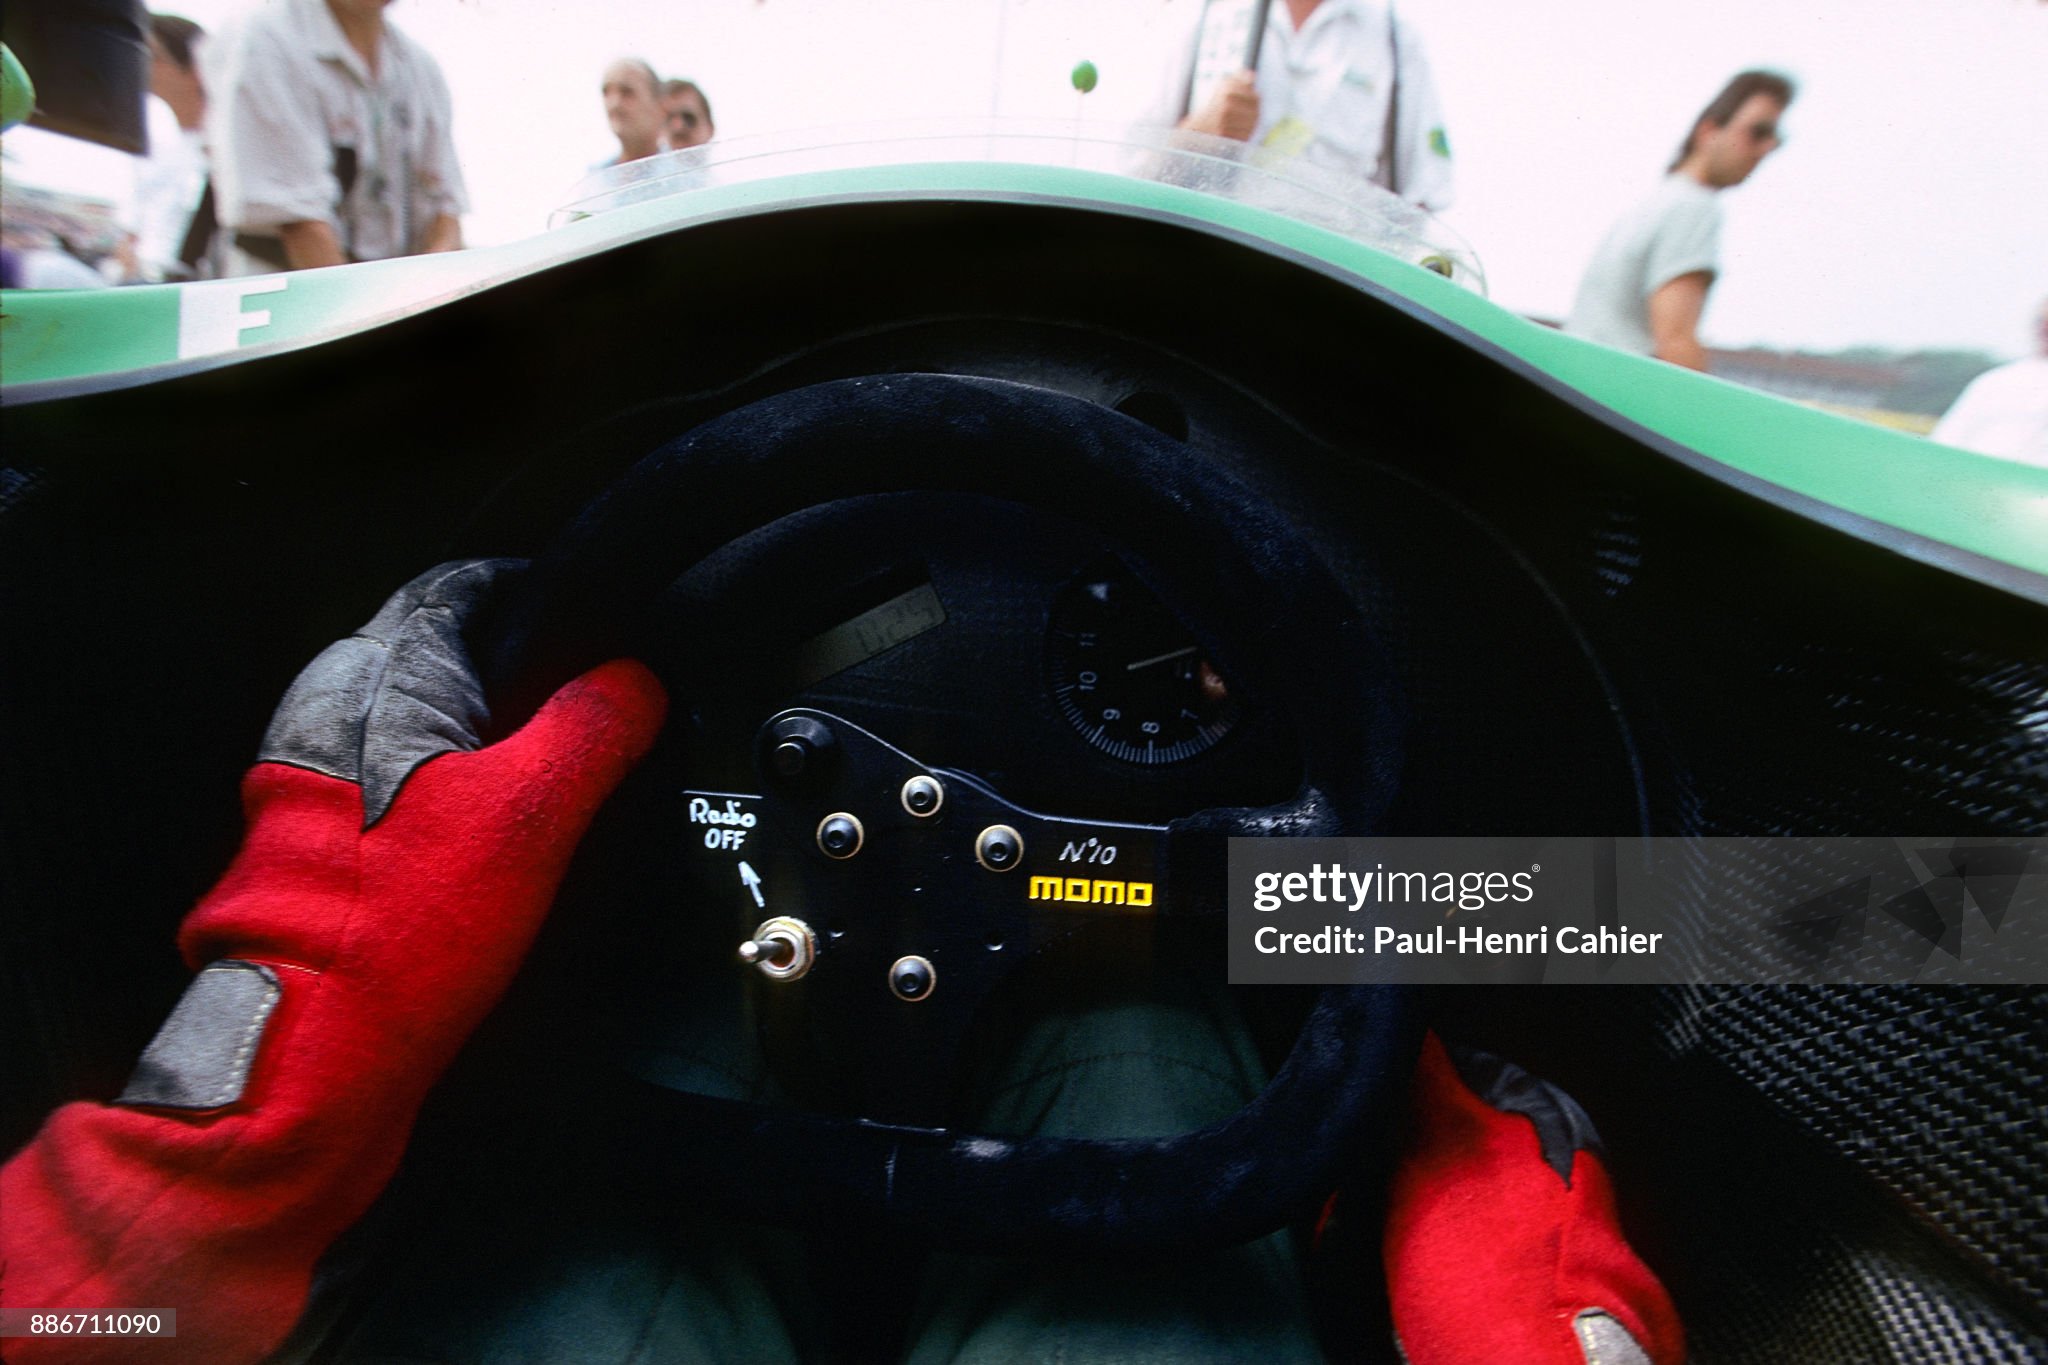 Alessandro Nannini, Benetton-Ford B189, Grand Prix of Hungary, Hungaroring, 13 August 1989. Alessandro’s hands in the cockpit.